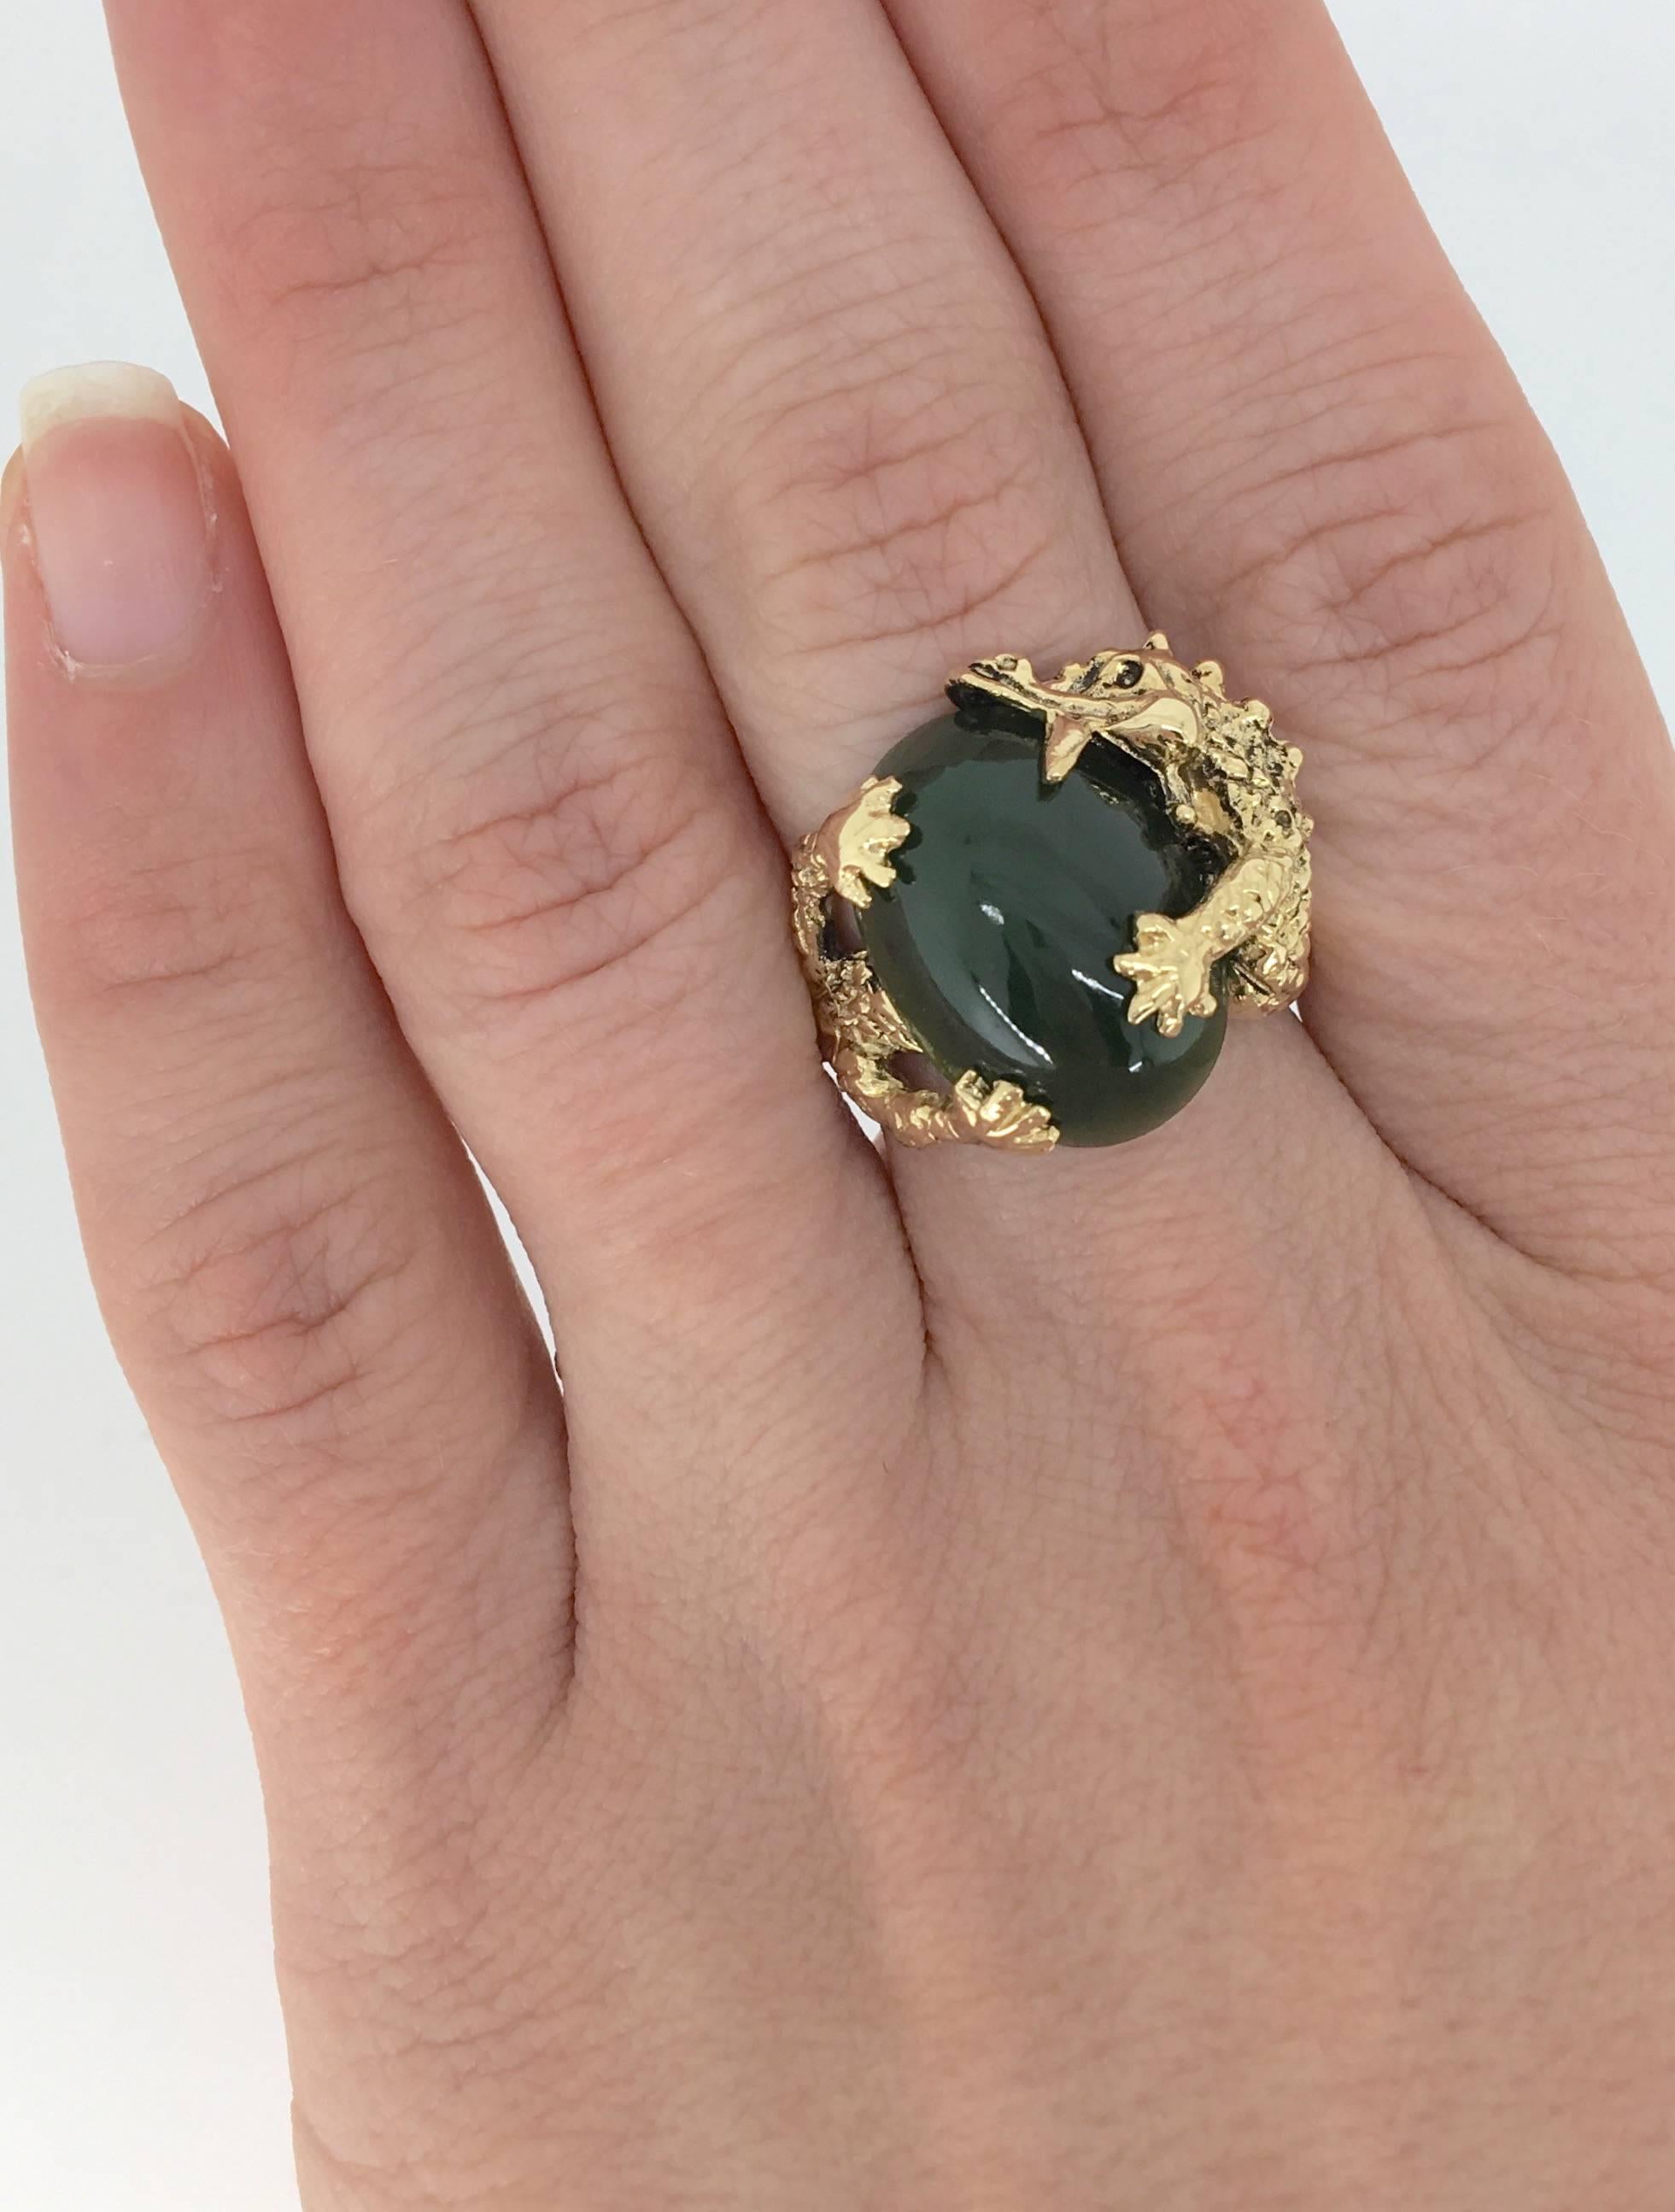 This unique ring features a large 18.0MM X 12.8MM Jade. The ring is crafted to resemble a dragon wrapped around the jade. The 14K yellow gold ring is size 7.75 and weighs 11.6 grams.